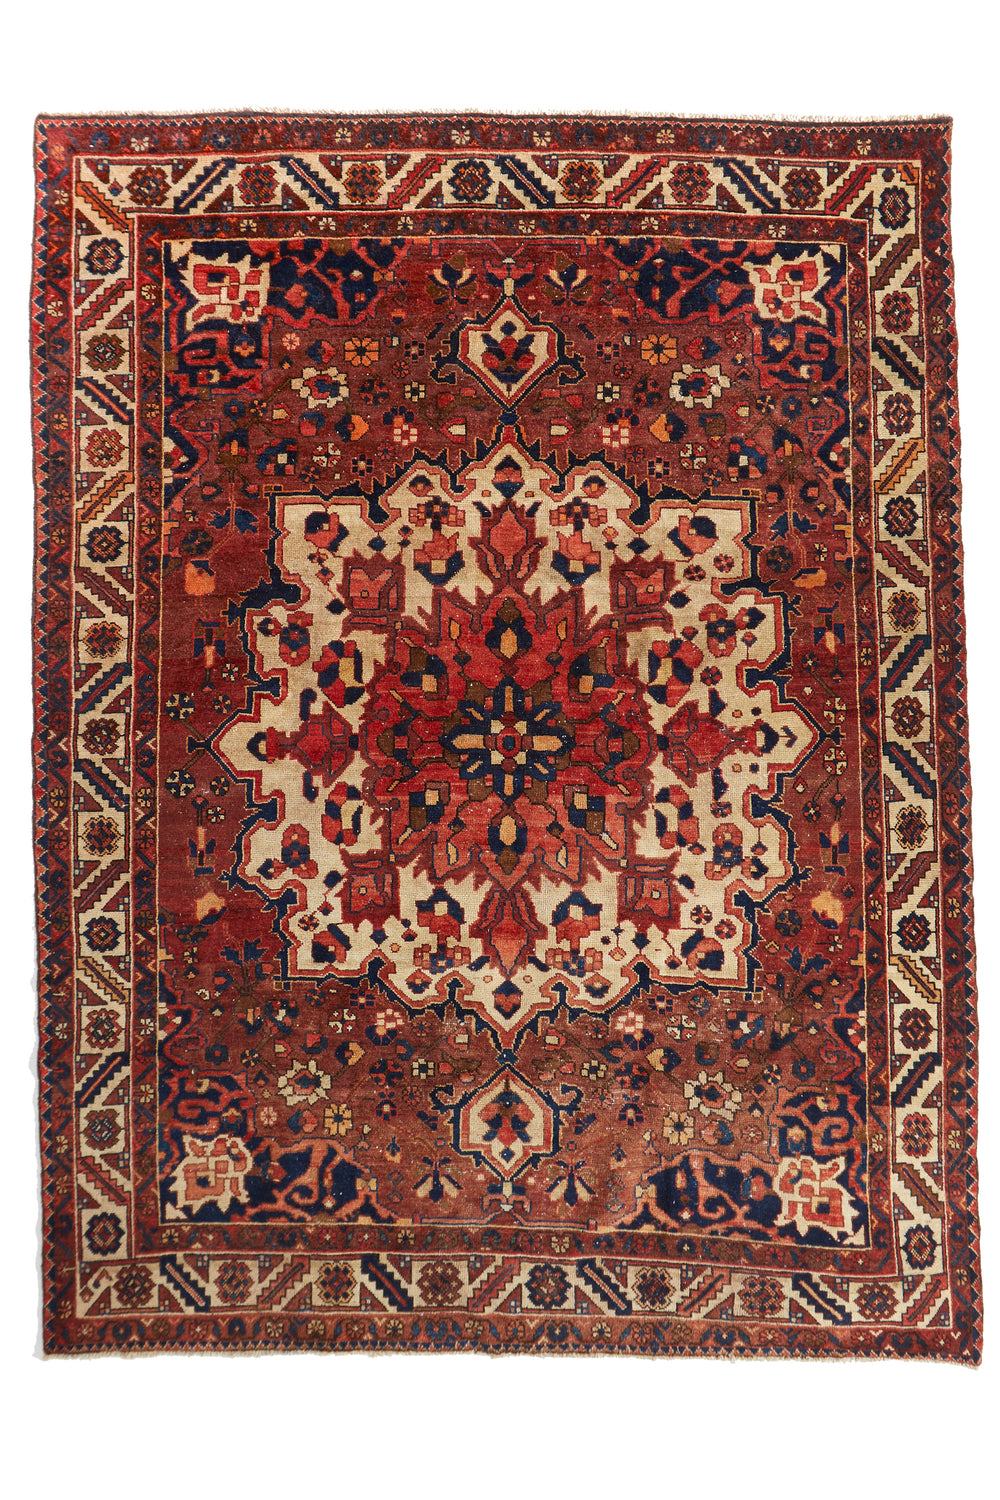 'Firefly' Vintage Persian Rug - 7'8